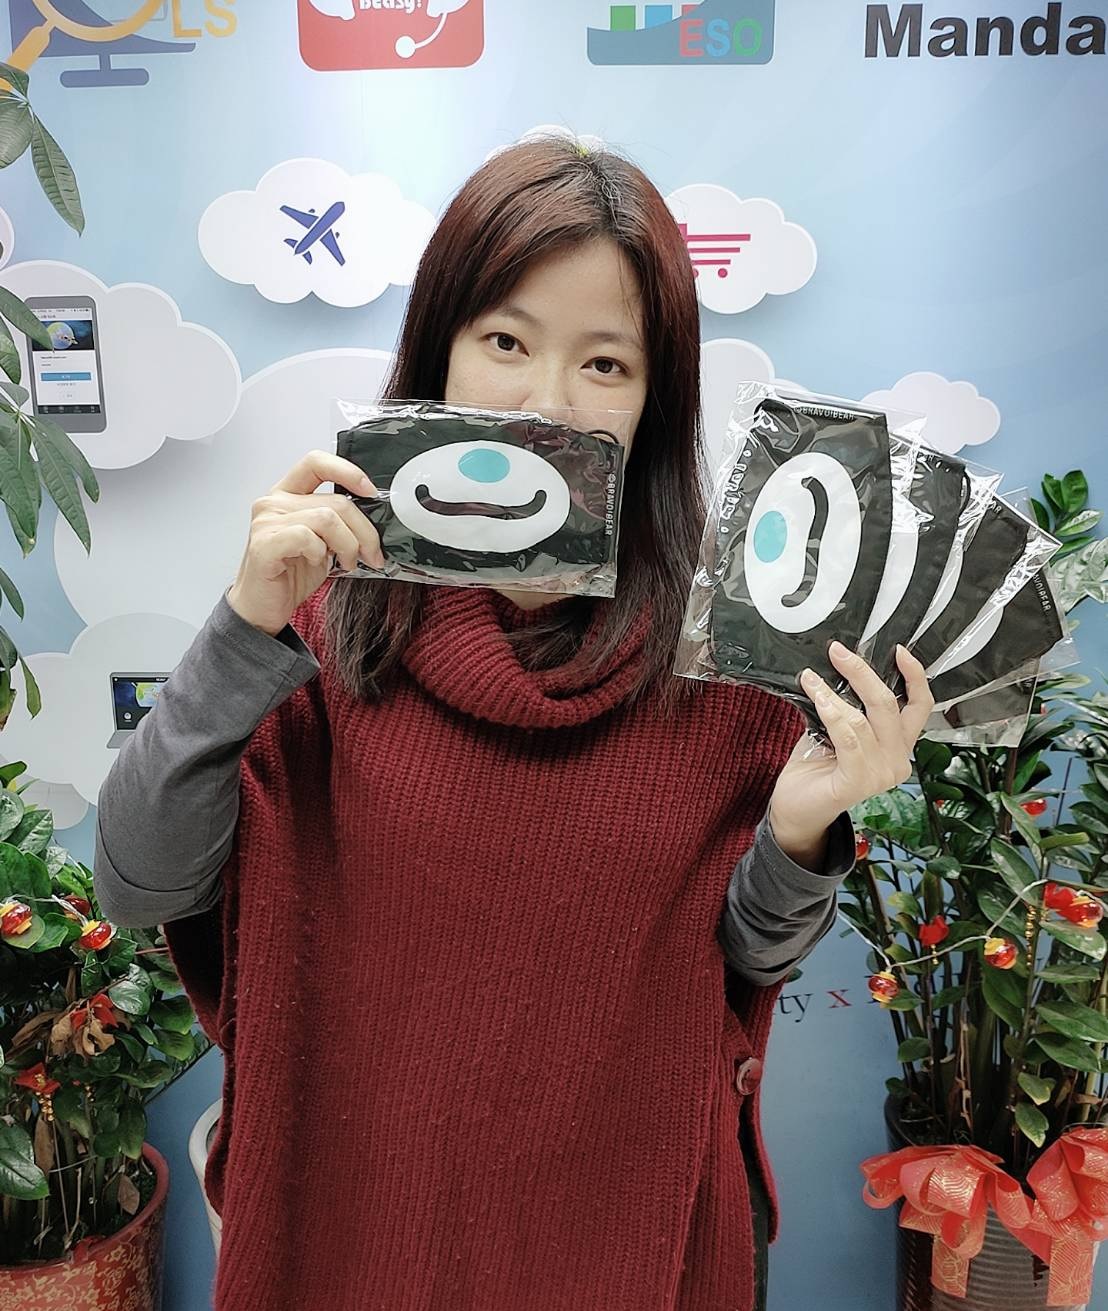 Bravo face mask. Source: Department of Information and Tourism, Taipei City Government